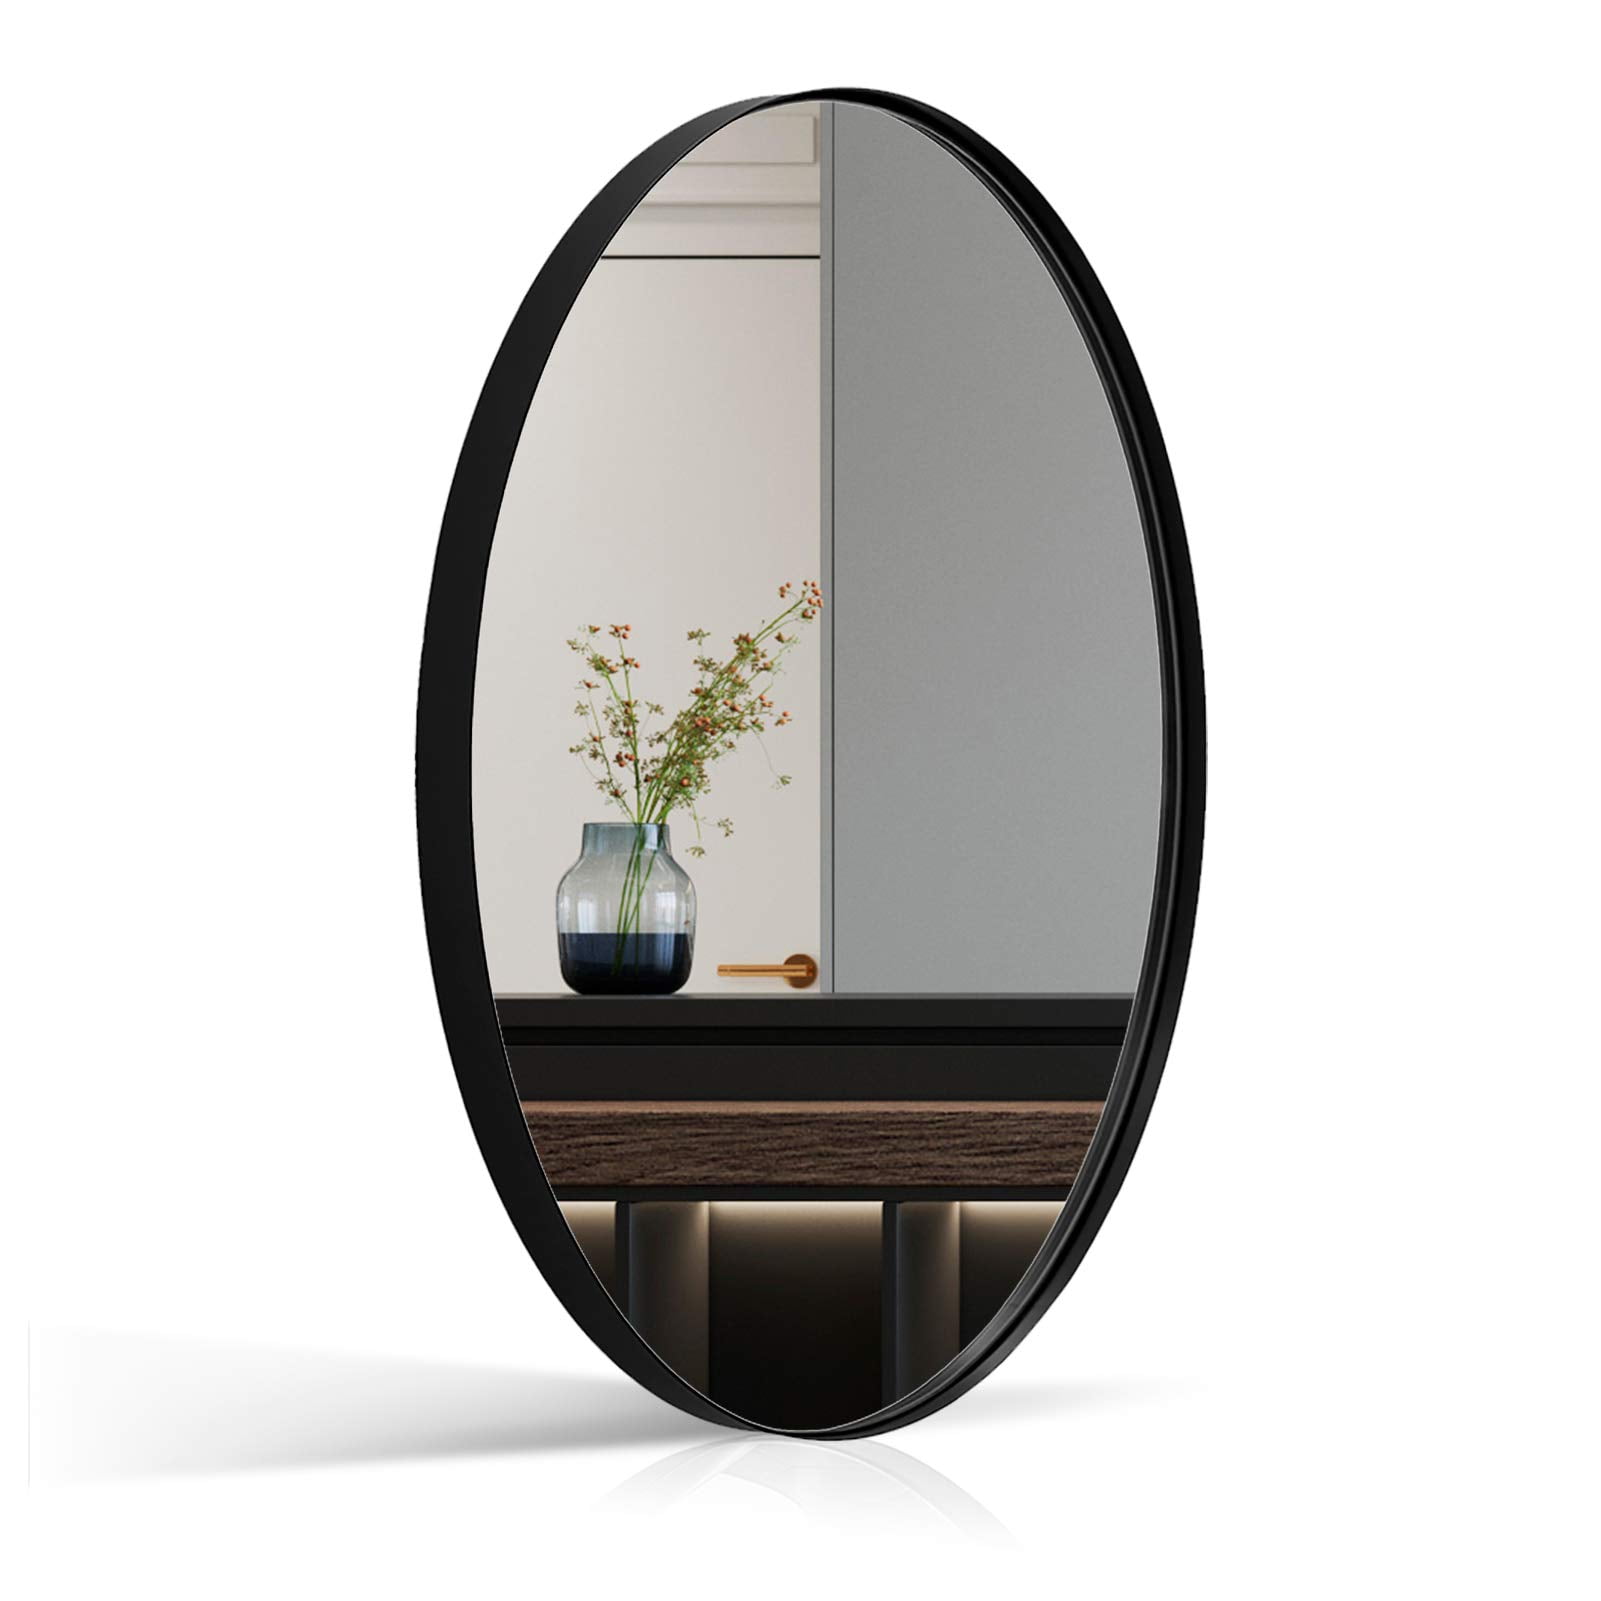 Andy Star Wall Mirror For Bathroom, Large Wall Mirror Black Frame